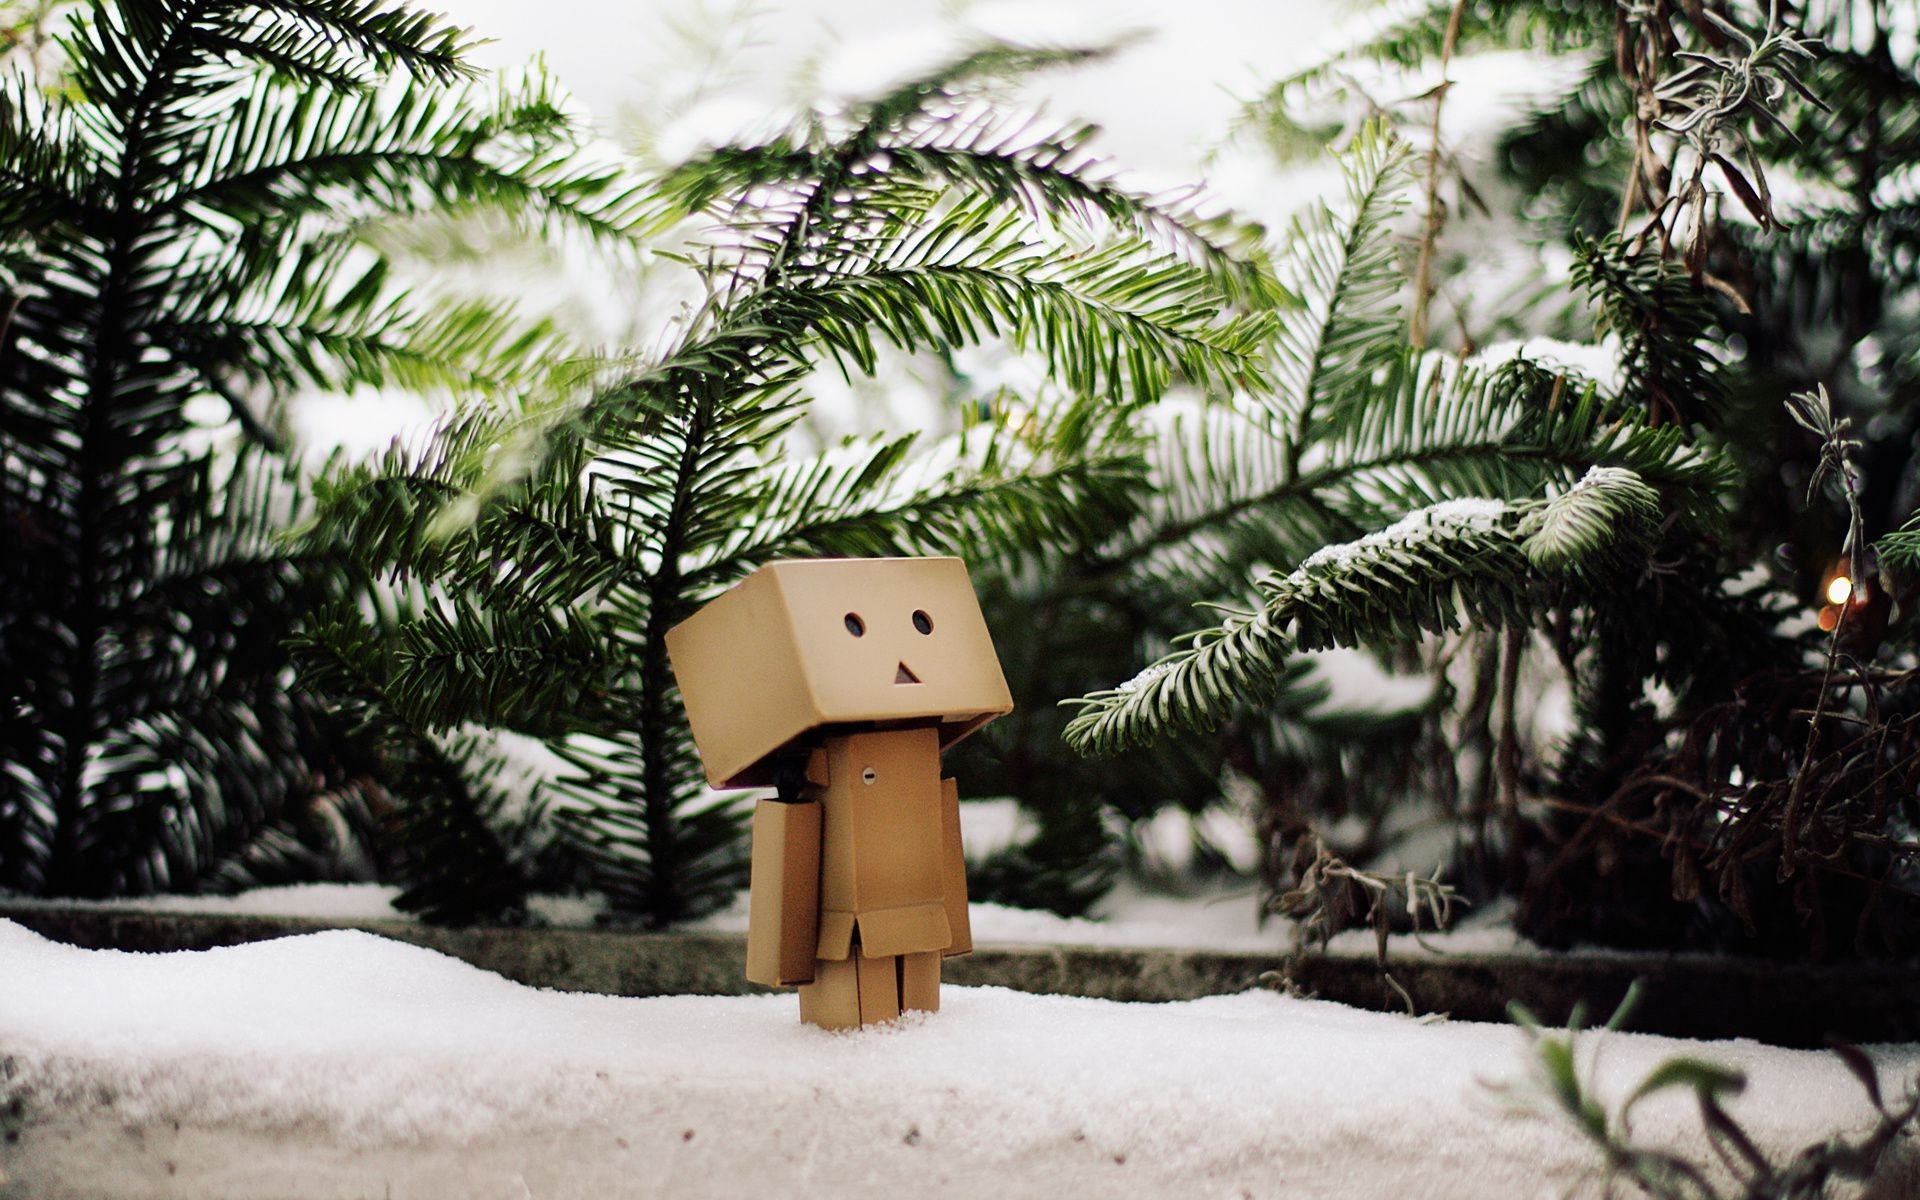 A robot made of cardboard boxes stands in the snow among the fir branches  wallpaper